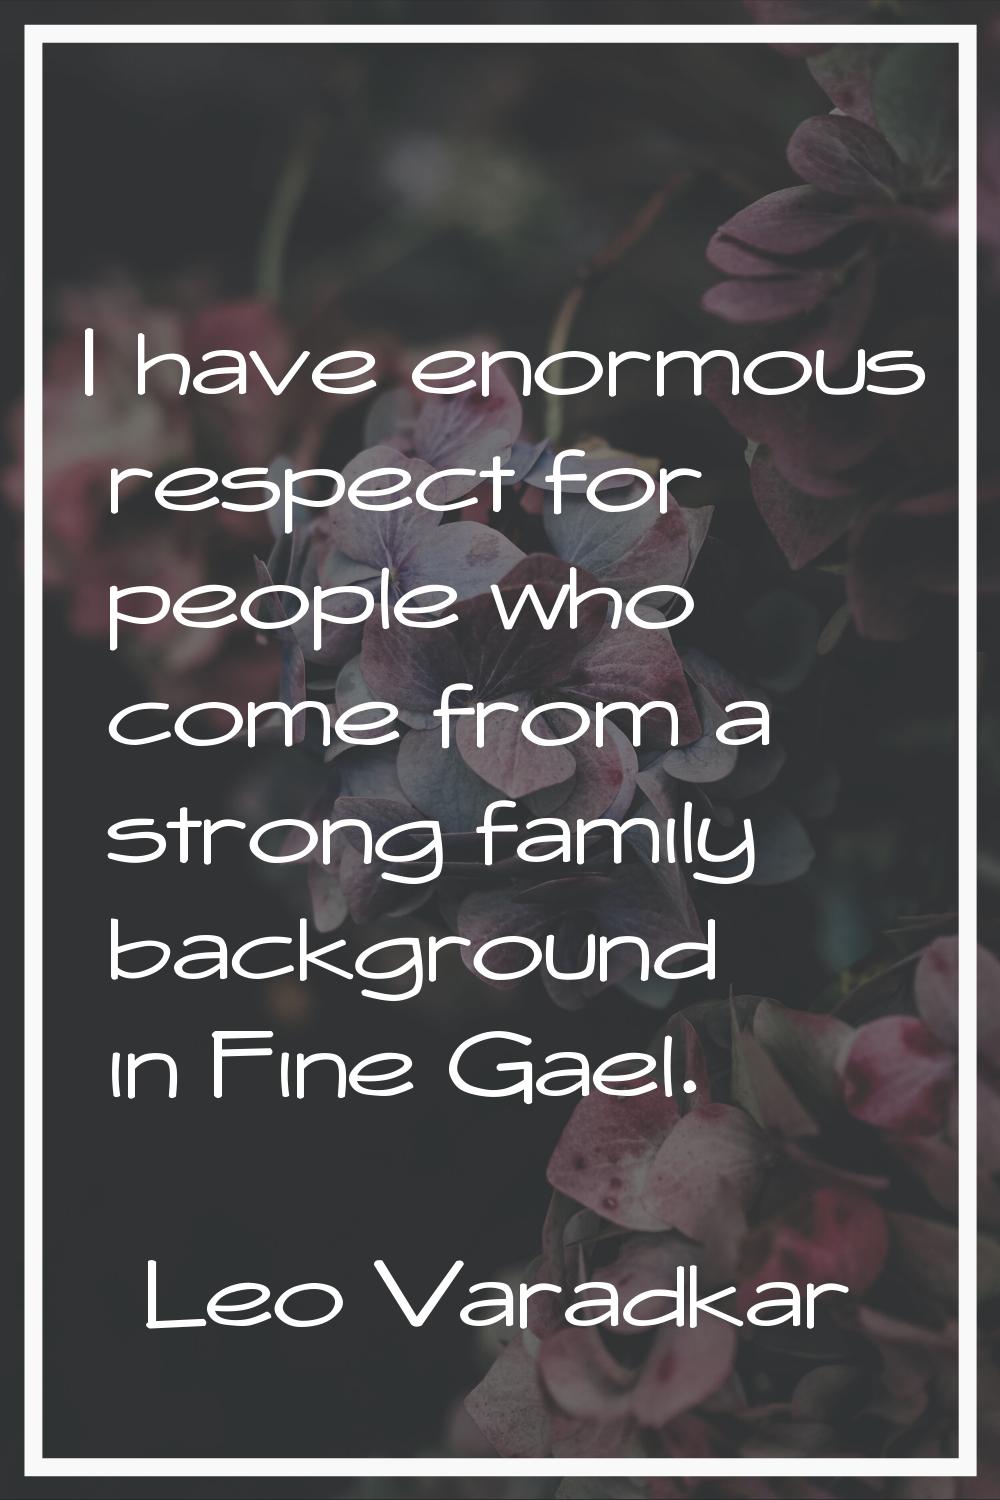 I have enormous respect for people who come from a strong family background in Fine Gael.